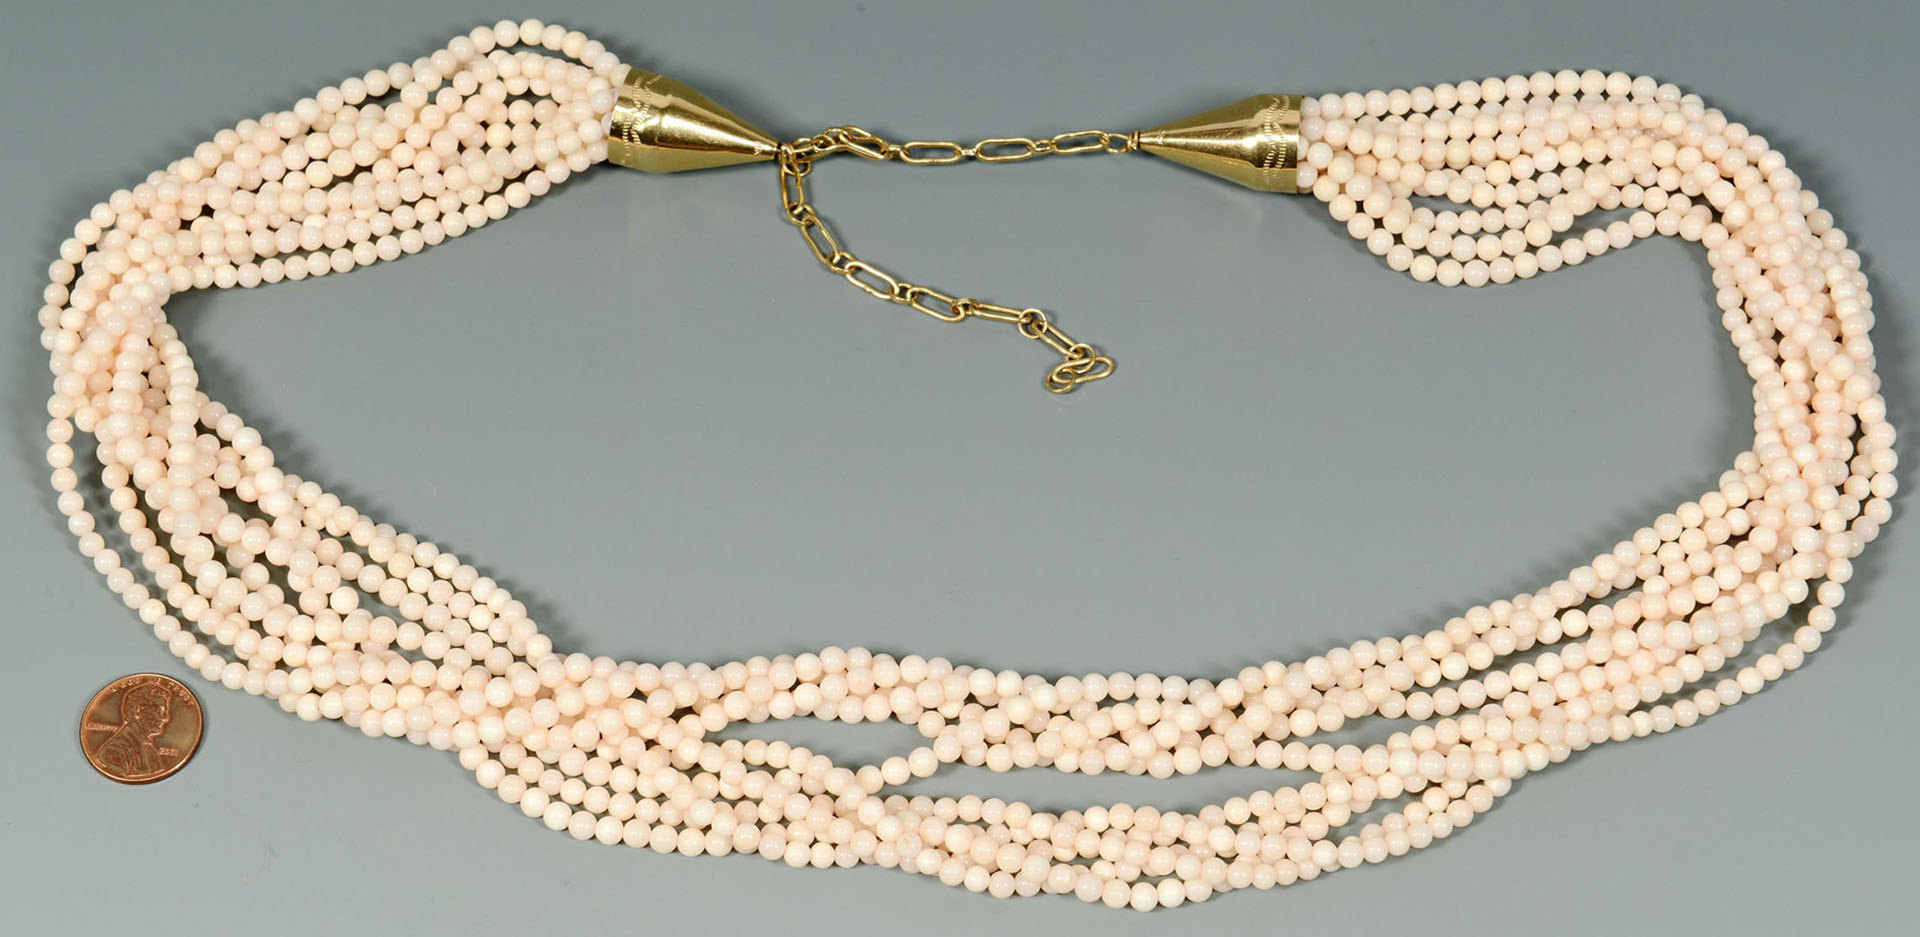 Lot 493: Angelskin Coral and 14K Gold Necklace